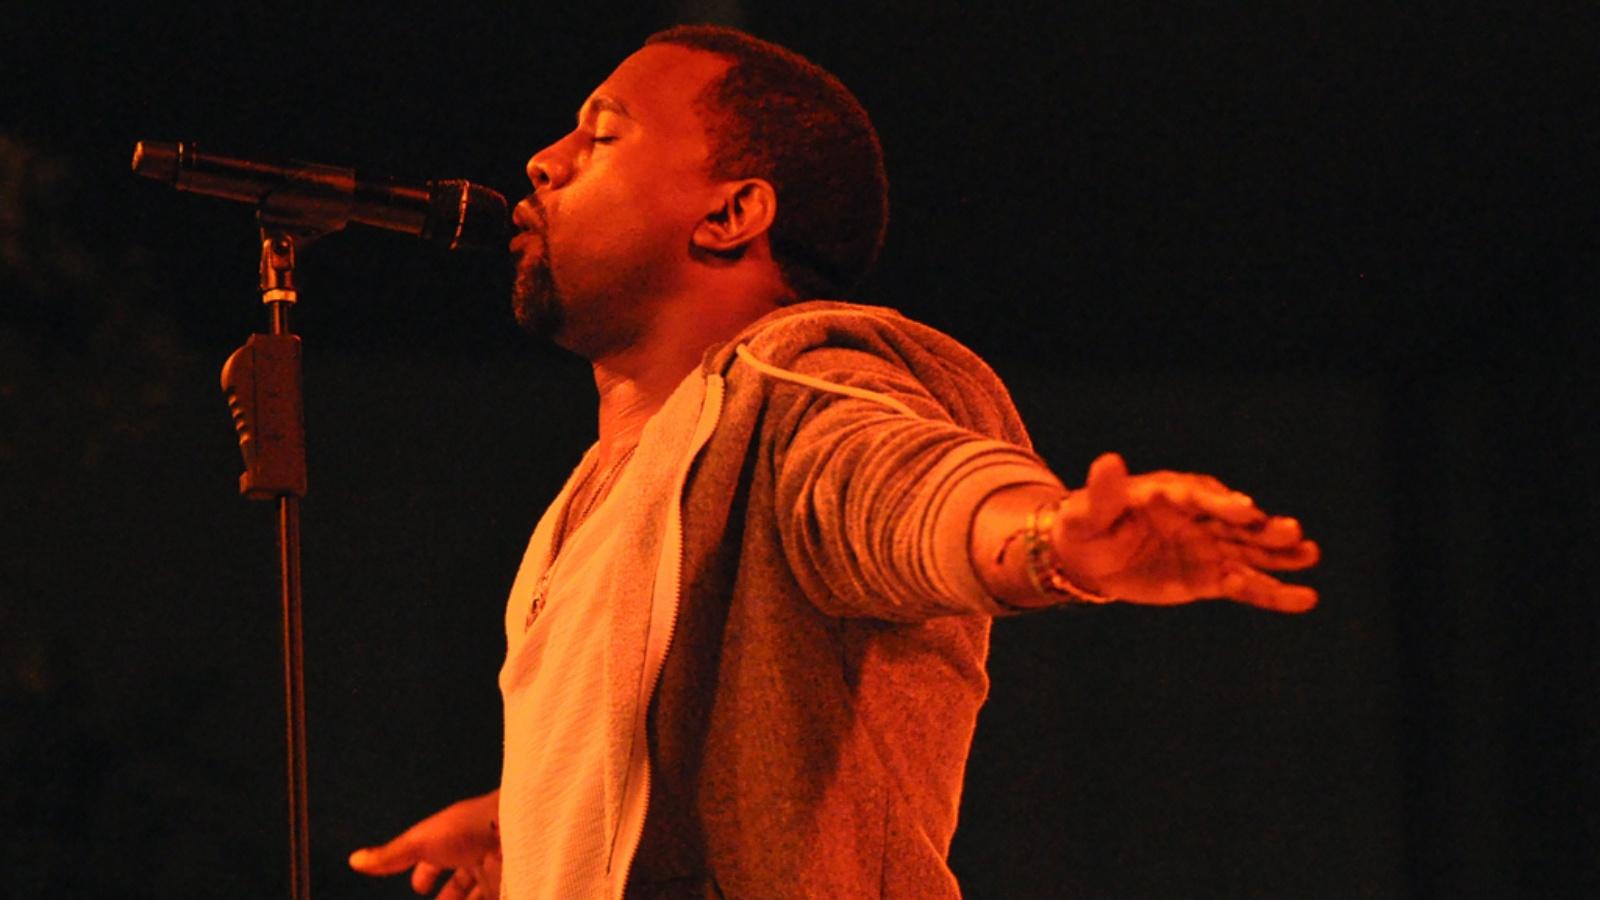 Kanye West performing onstage at a concert